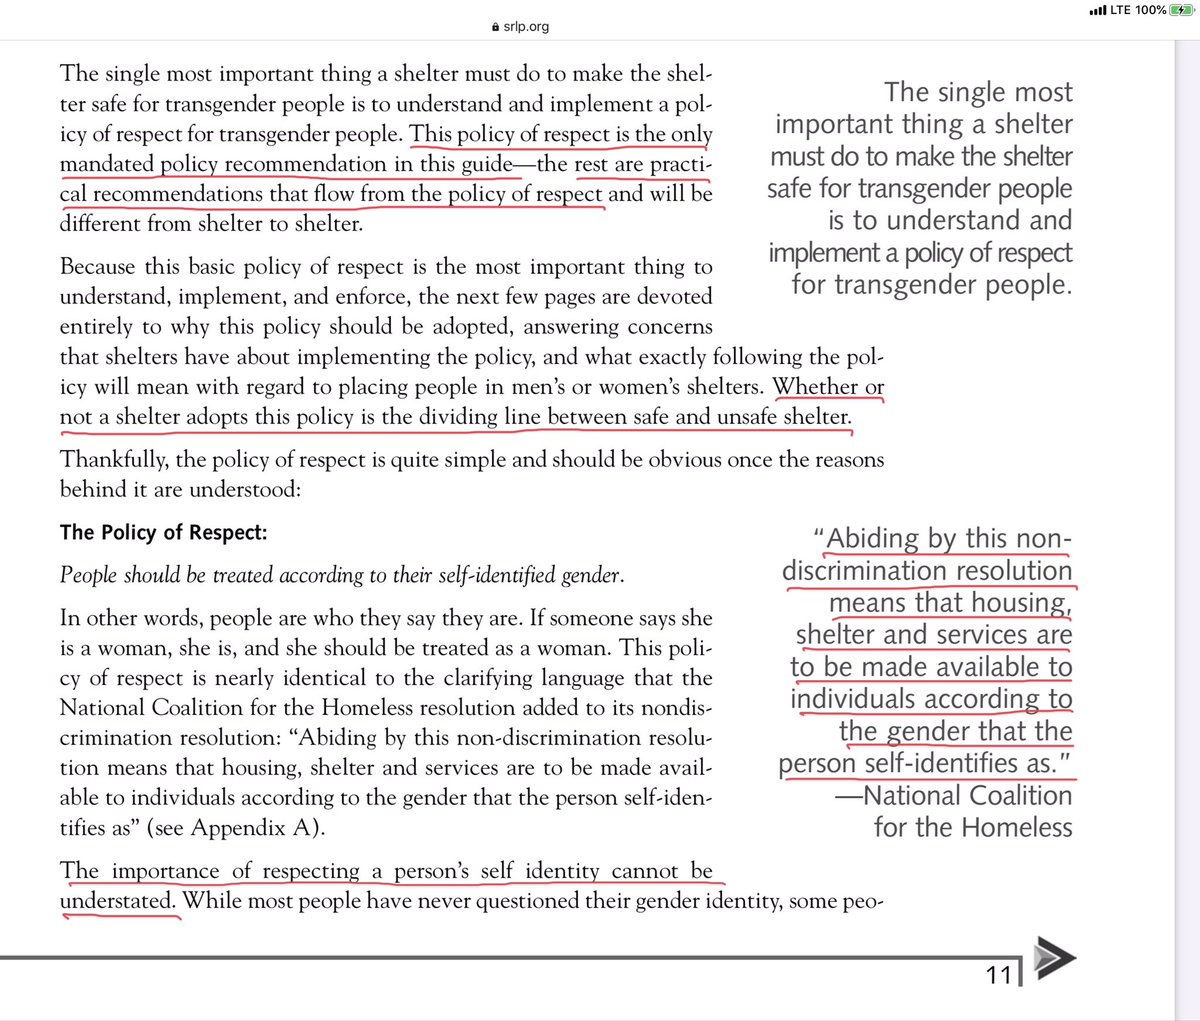 Here’s the most important part of the shelter guide, according to the authors: “This policy of respect is the only mandated policy recommendation in this guide,” and, “The Policy of Respect: People should be treated according to their self-identified gender.”